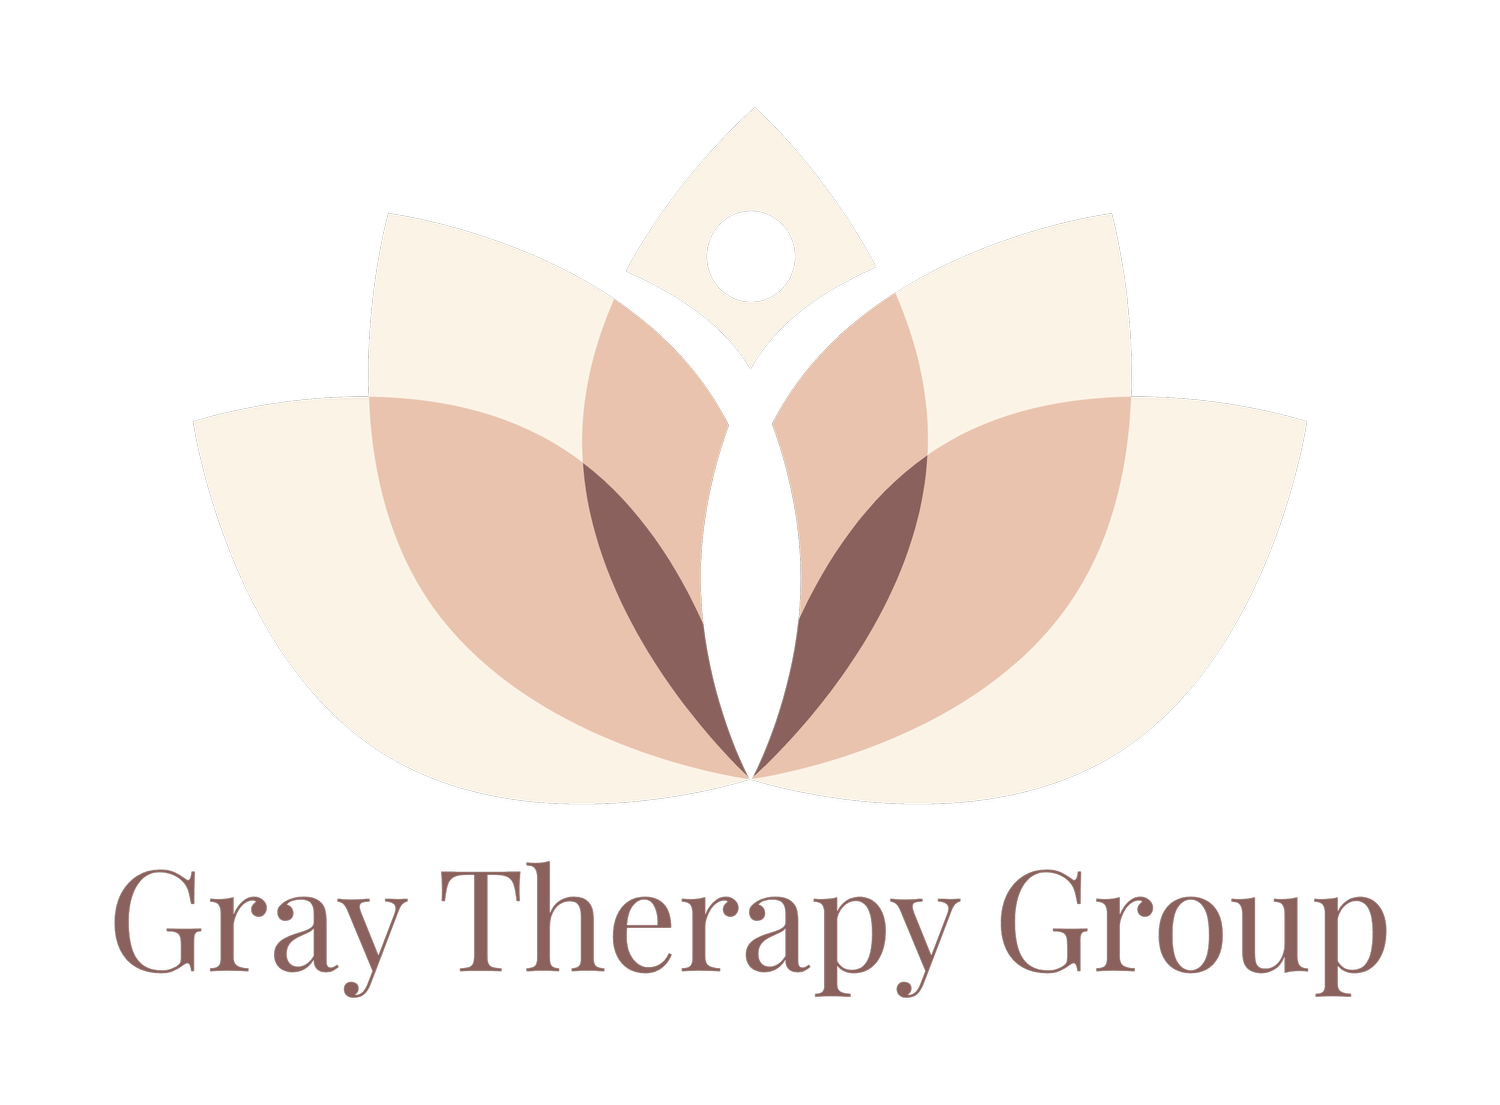 Gray Therapy Group